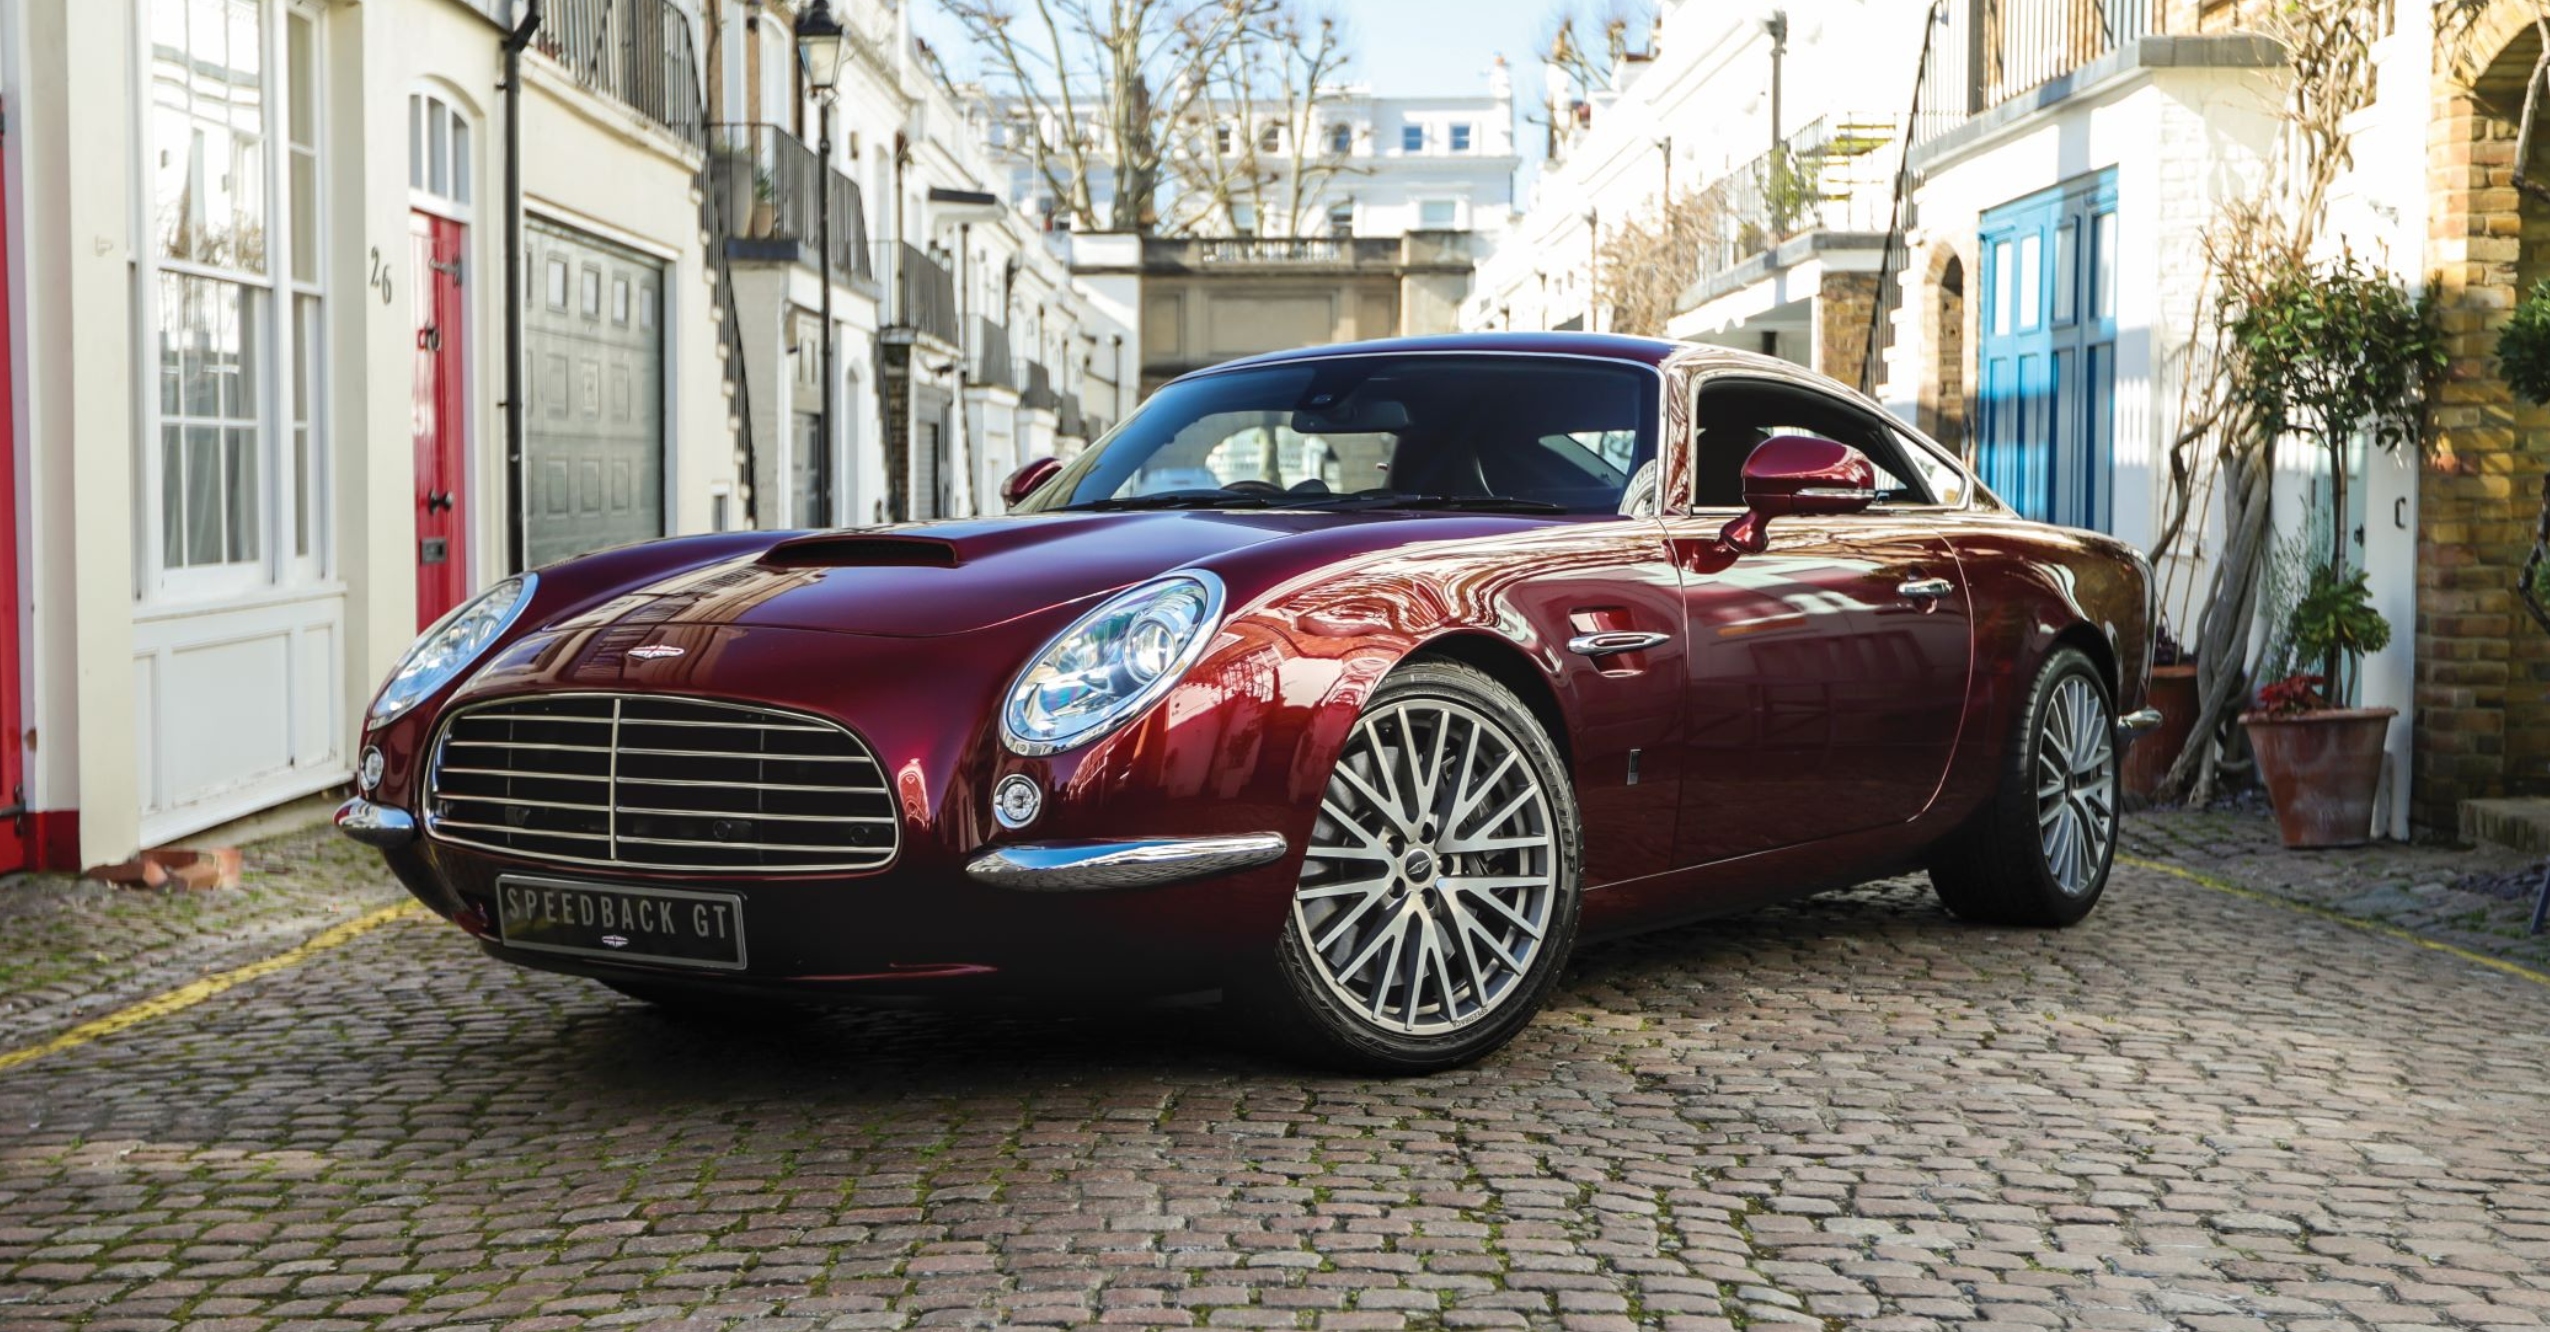 This David Brown Speedback GT Is A Glorious Tribute To James Bond's  Favorite Ride - Maxim